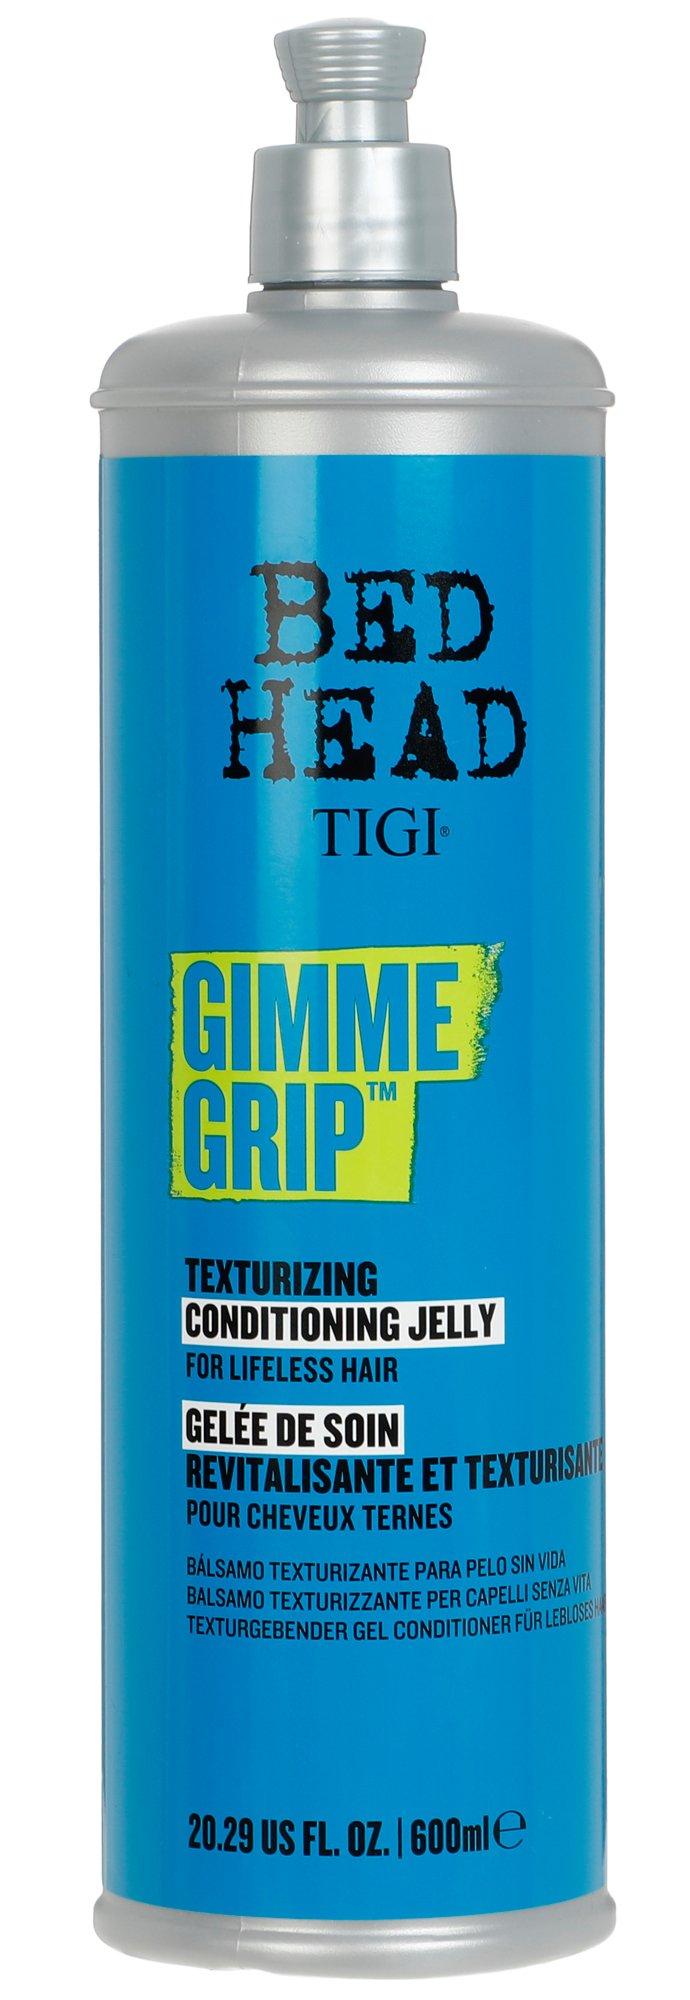 20 oz Gimmie Grip Texturizing Conditioning Jelly